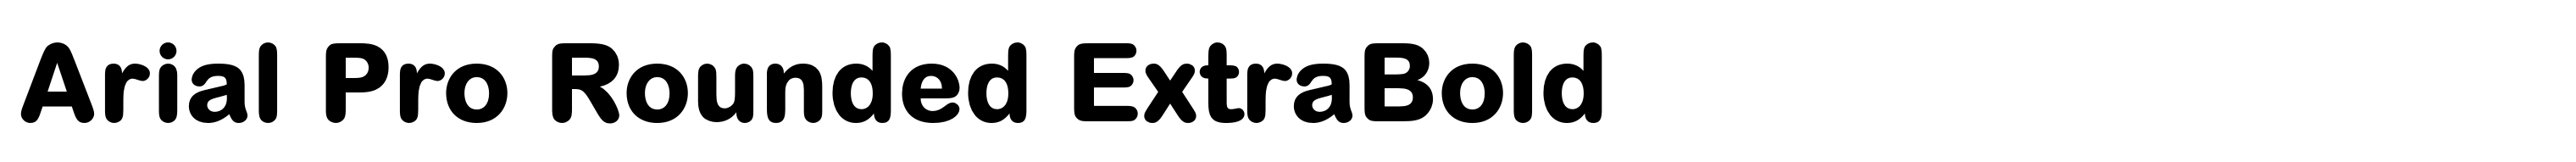 Arial Pro Rounded ExtraBold